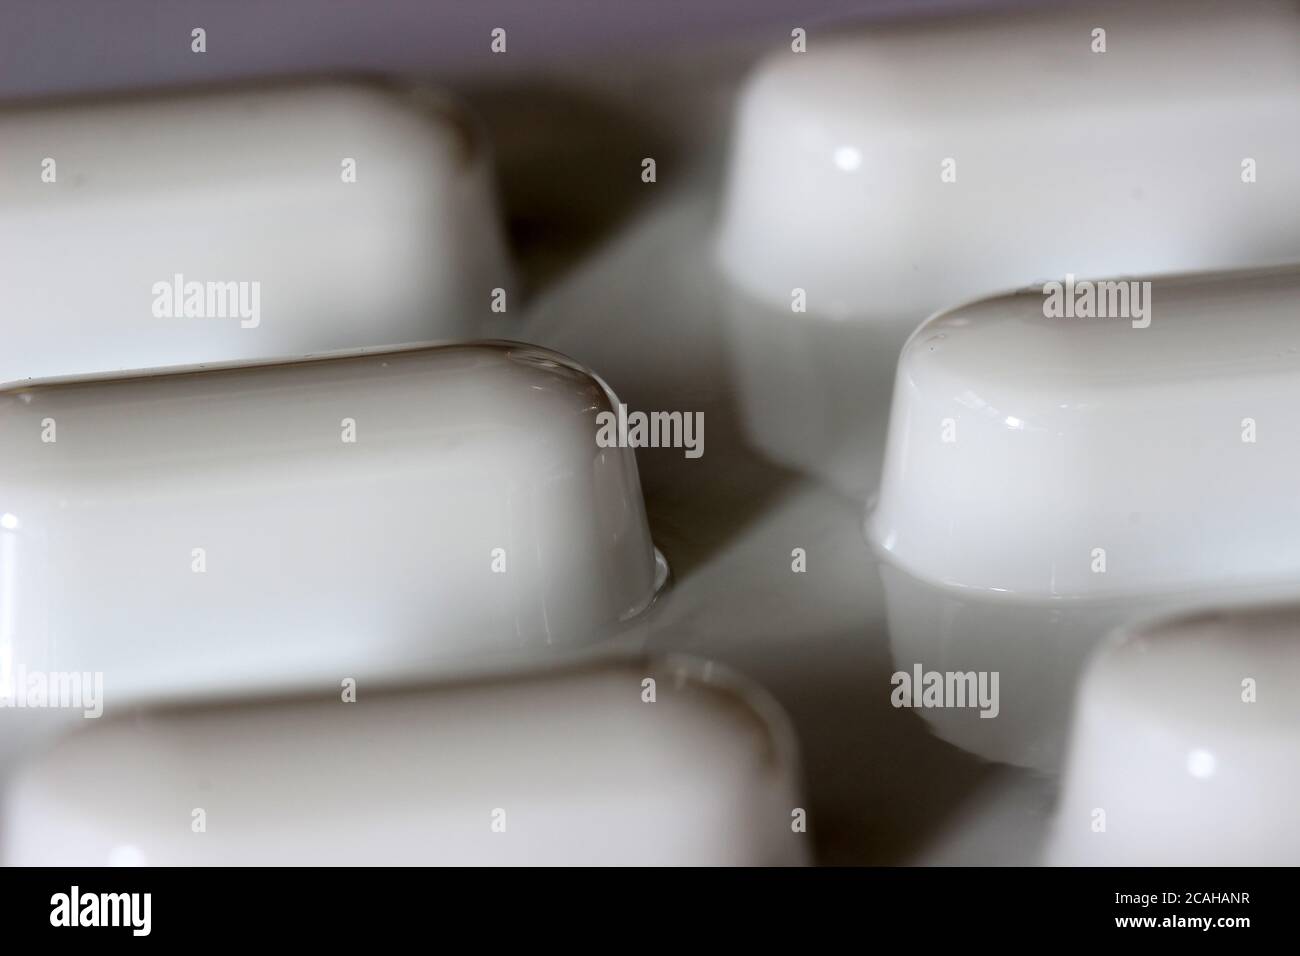 Strip of tablets pictured close up Stock Photo